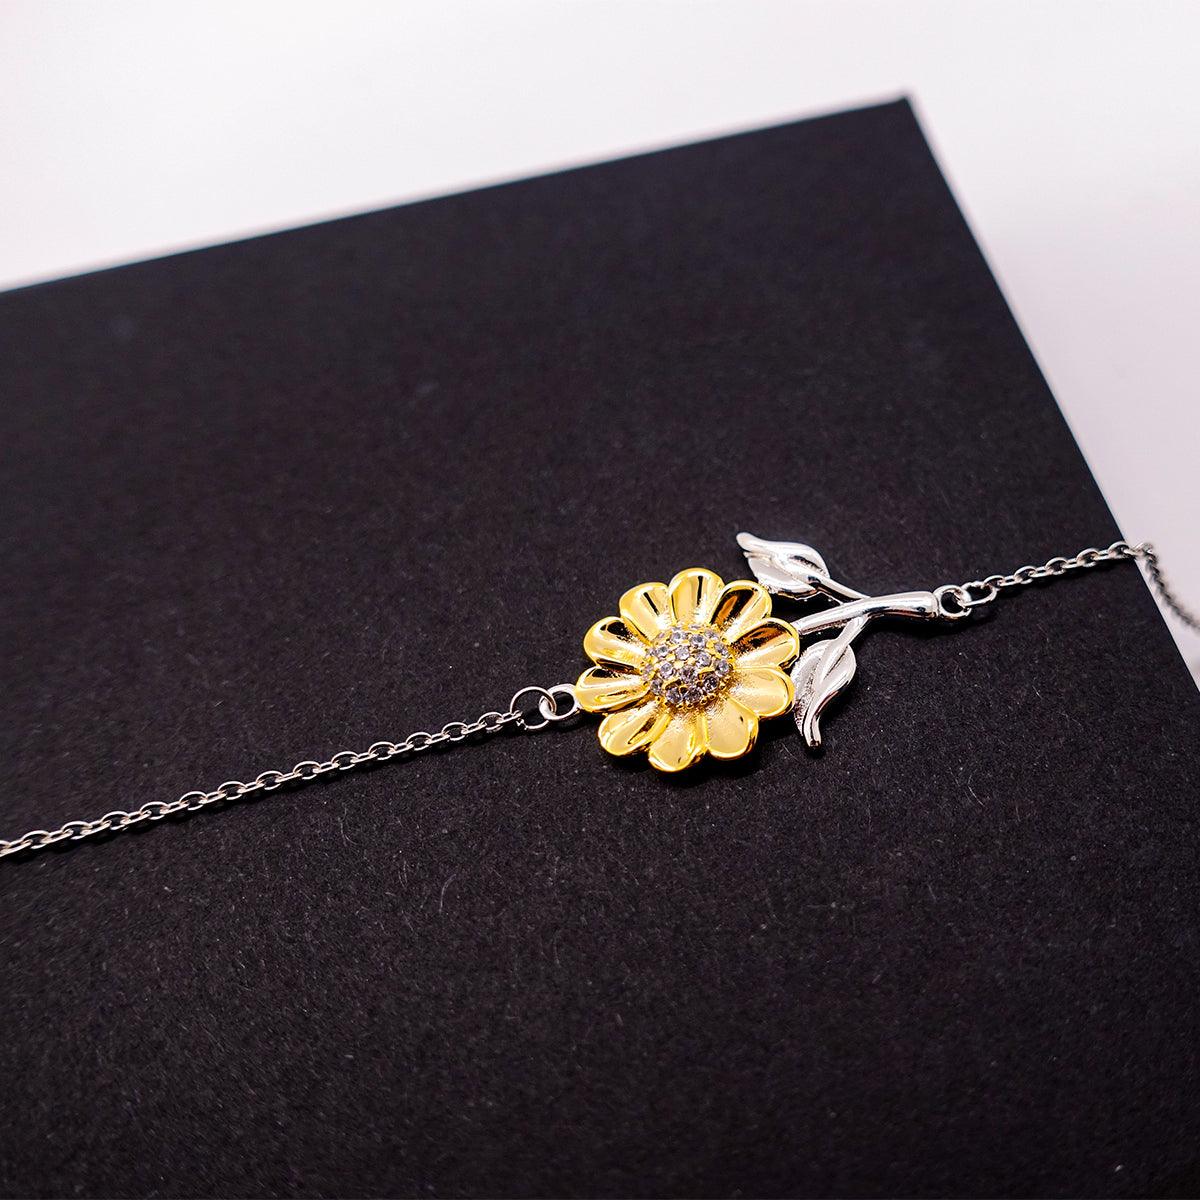 Missionary Sunflower Bracelet - Thanks for being who you are - Birthday Christmas Jewelry Gifts Coworkers Colleague Boss - Mallard Moon Gift Shop